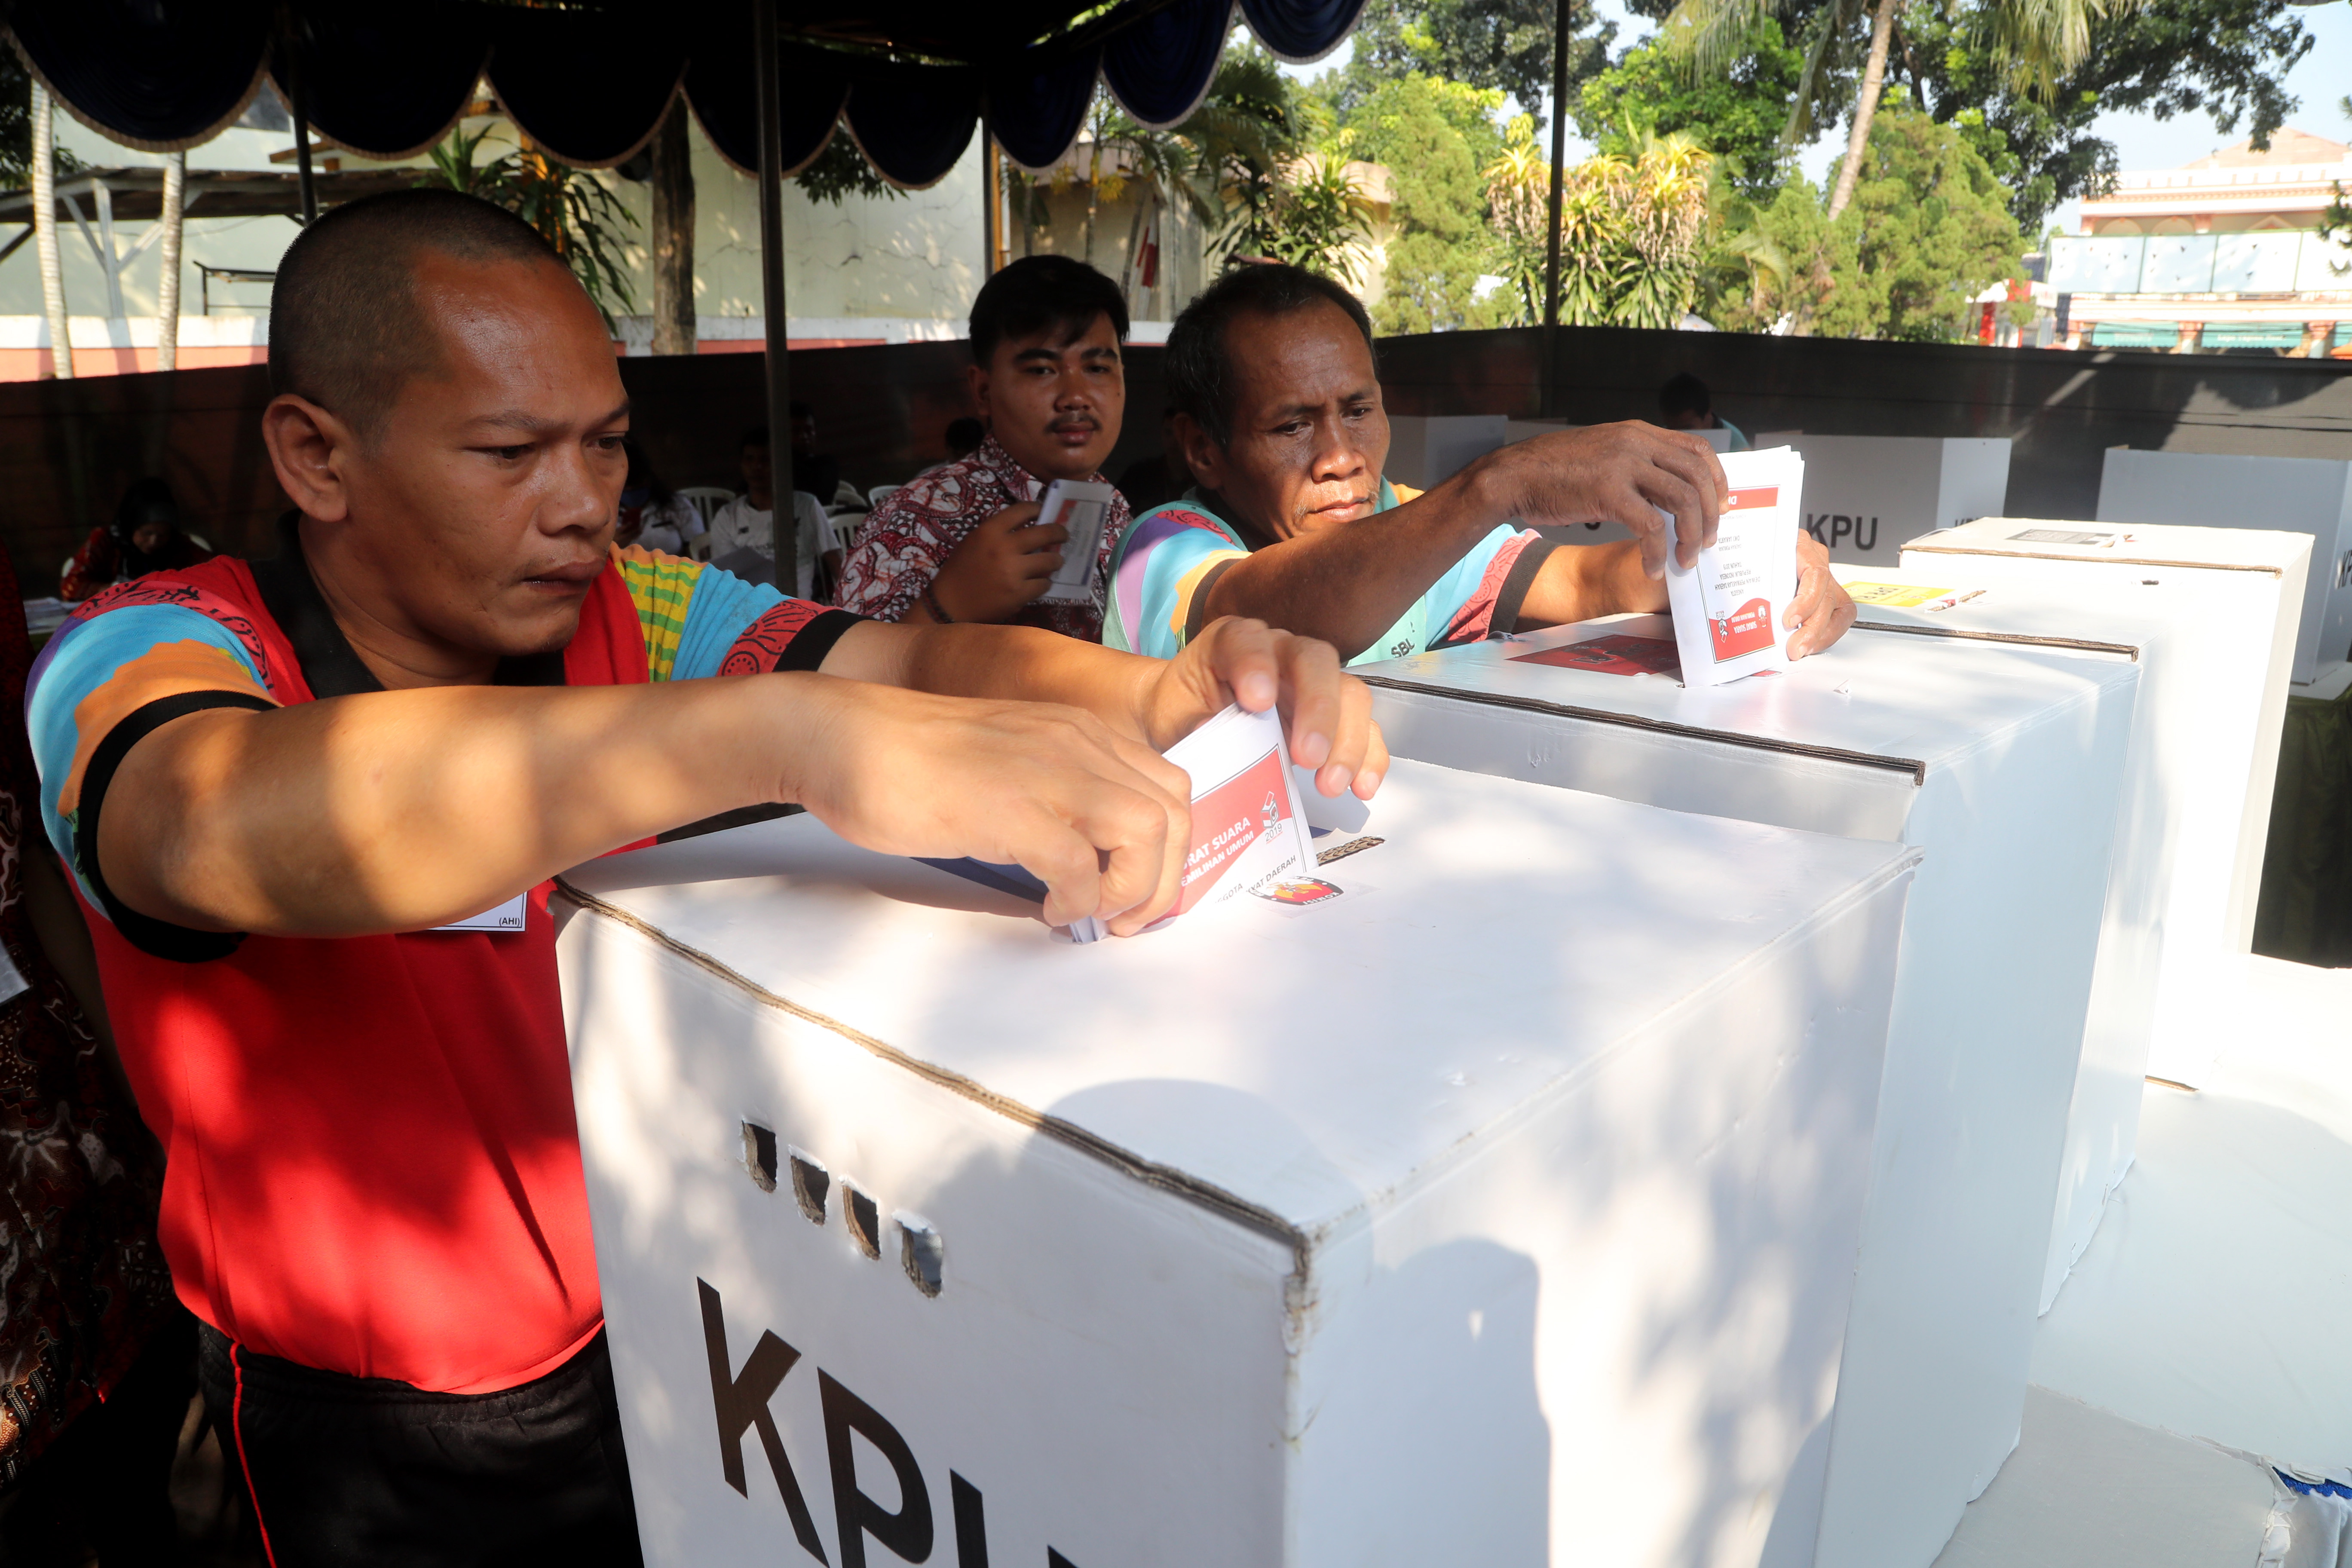 epa07511177 Two Indonesian mentally disabled men vote during the general election at a polling station in Jakarta, Indonesia, 17 April 2019. More than 192 million Indonesians cast their votes to elect the president, vice president and members of the House of Representatives as well as Regional Representative Council.  EPA/BAGUS INDAHONO